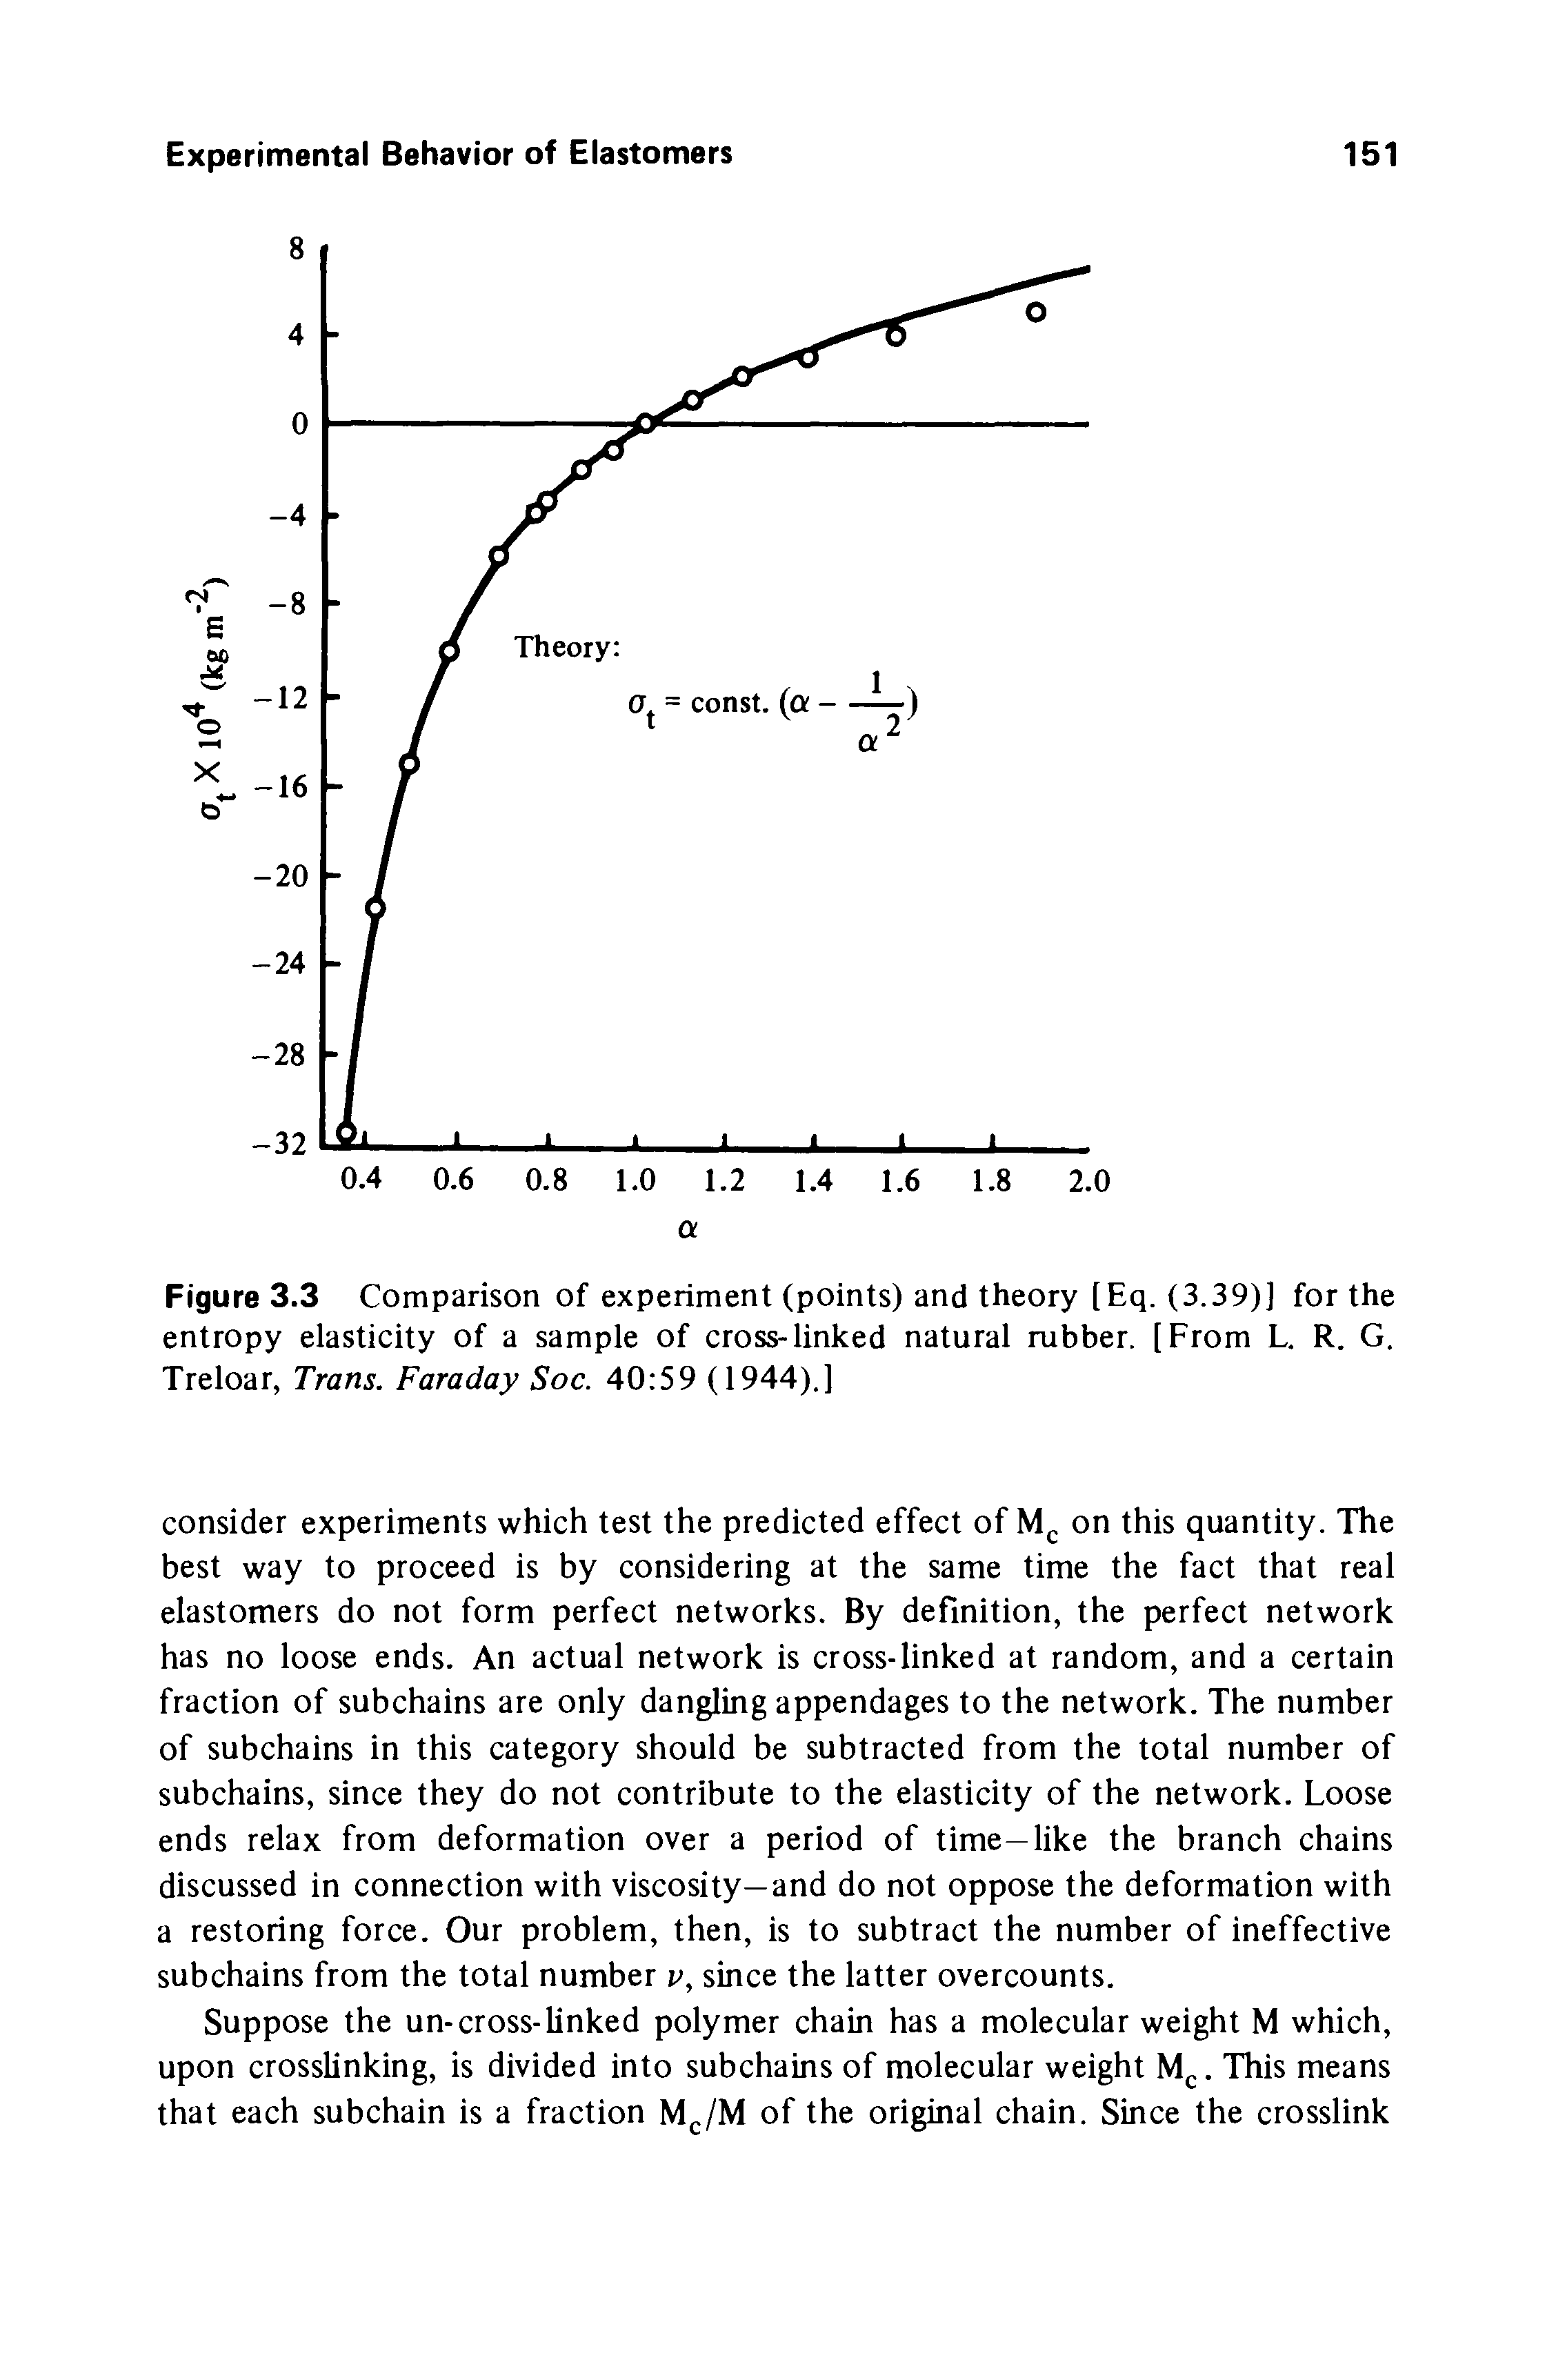 Figure 3.3 Comparison of experiment (points) and theory [Eq. (3.39)] for the entropy elasticity of a sample of cross-linked natural rubber. [From L. R. G. Treloar, Trans. Faraday Soc. 40 59 (1944).]...